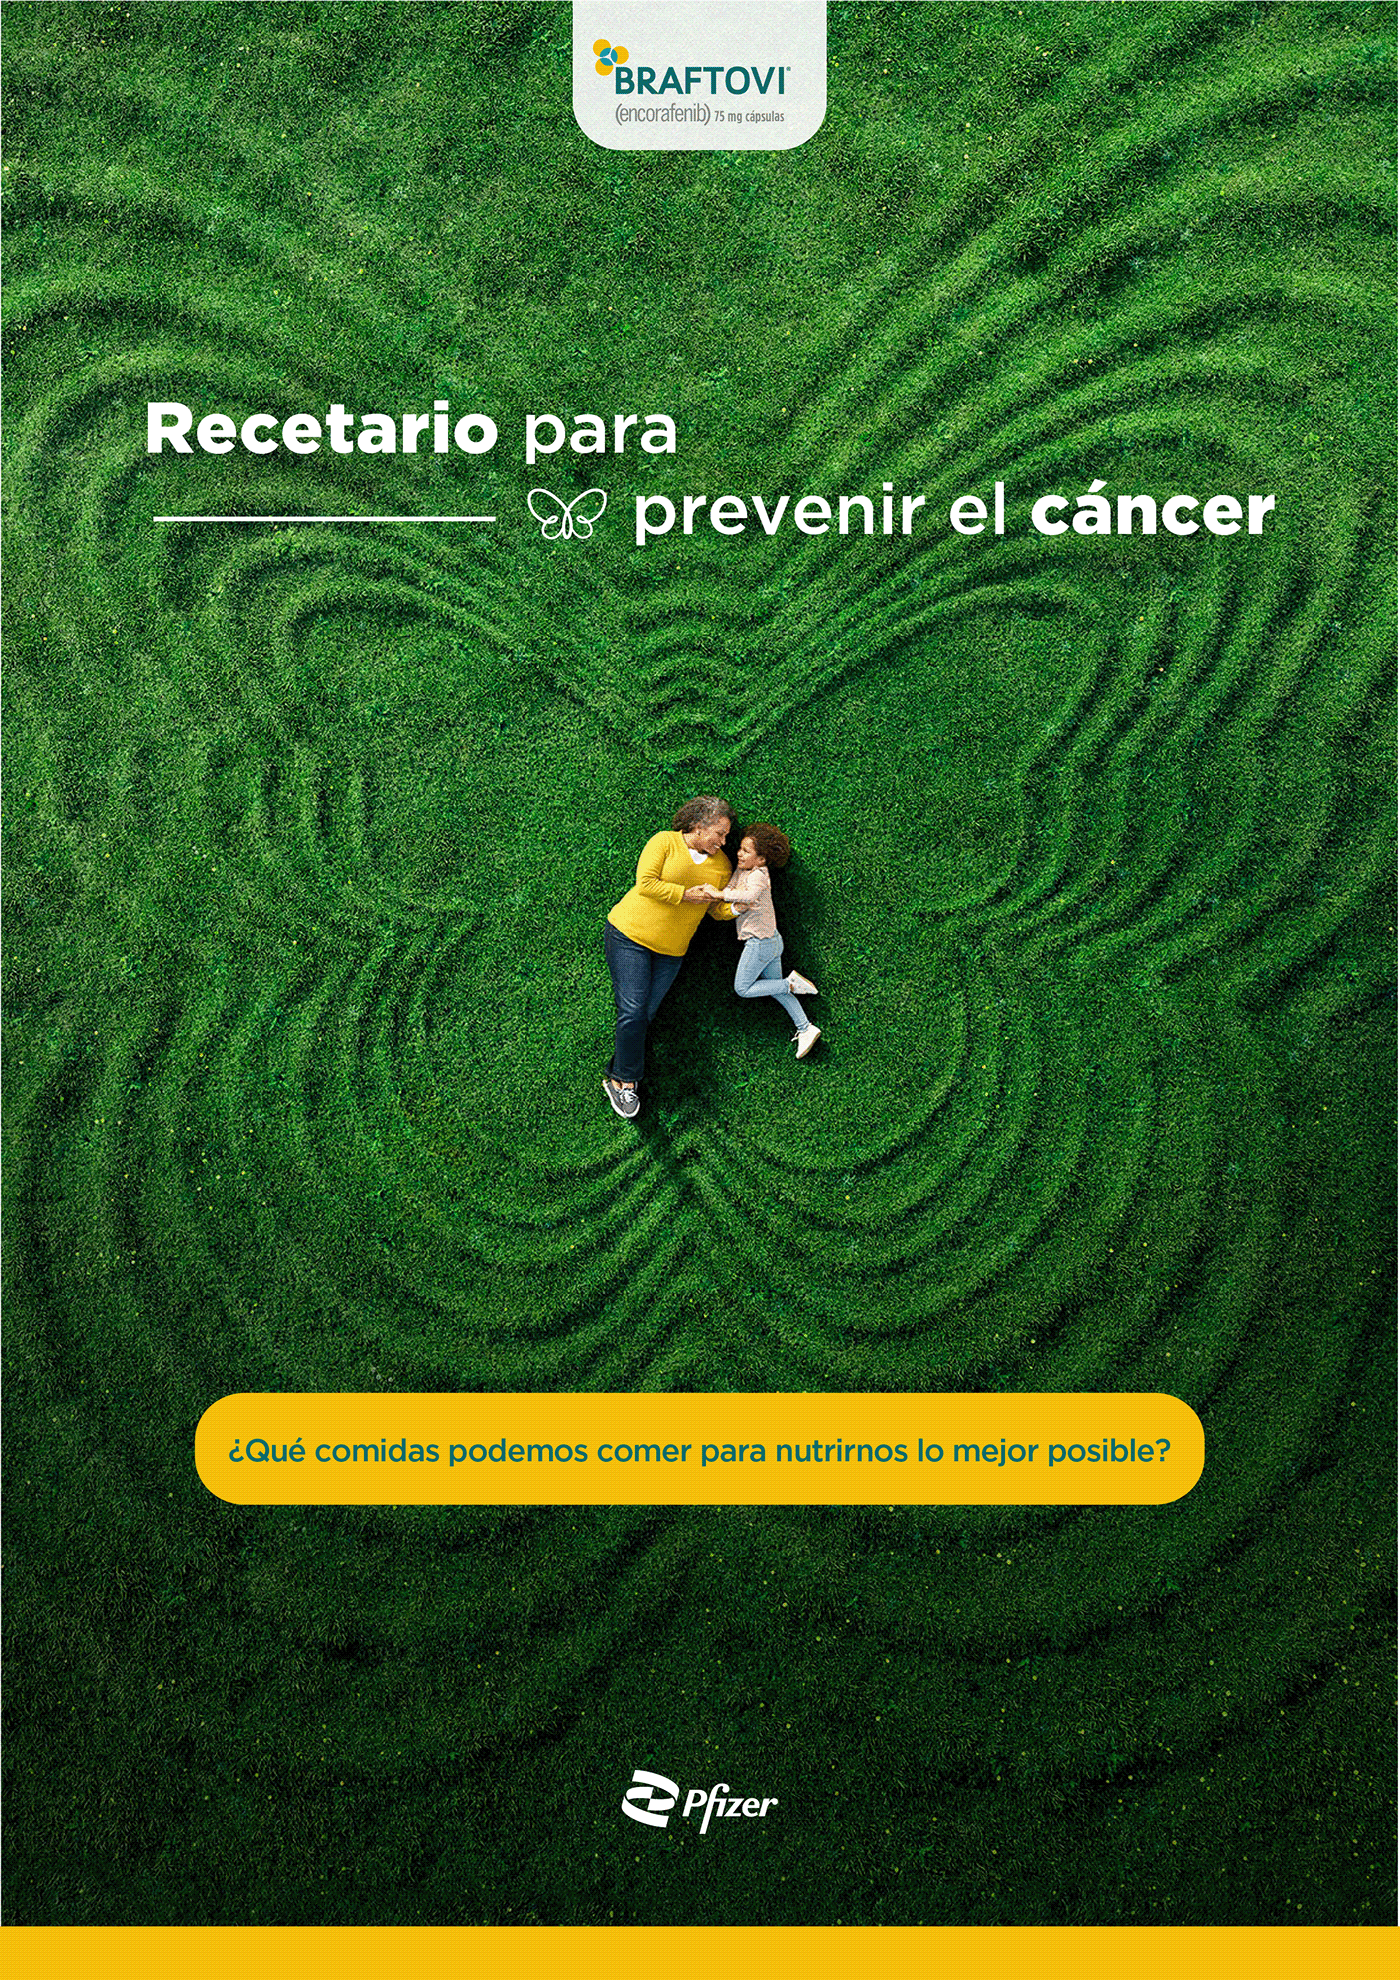 Oncologia Oncology Health Social media post Advertising  Graphic Designer pfizer Pharma